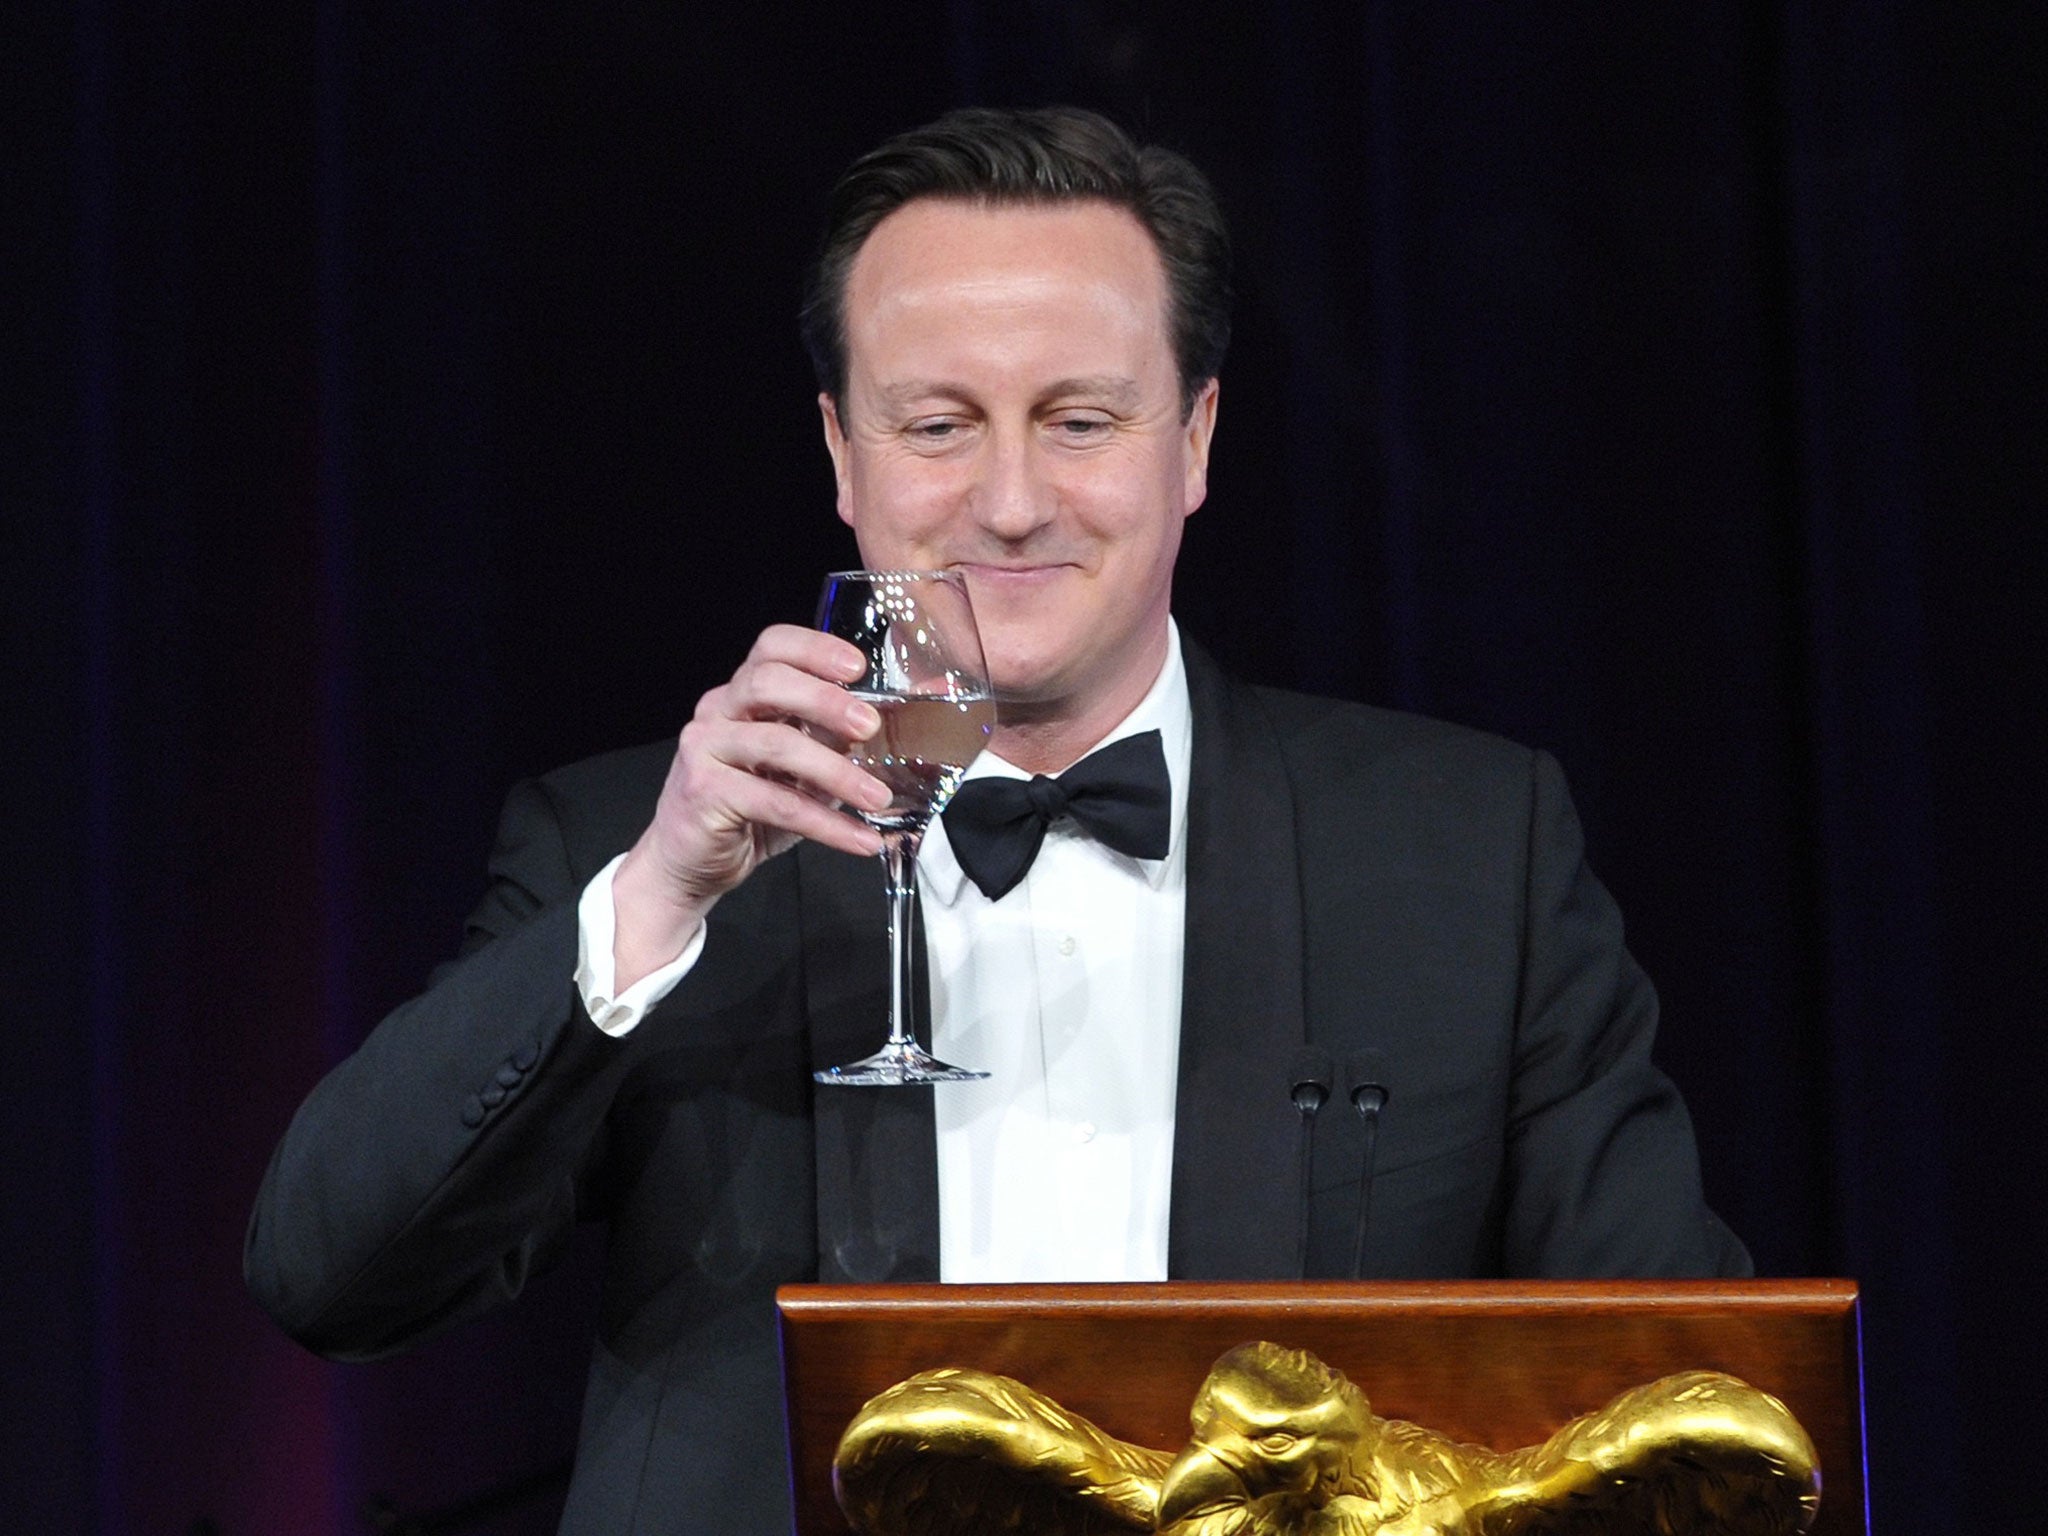 David Cameron has ruled out running for Prime Minister beyond 2020